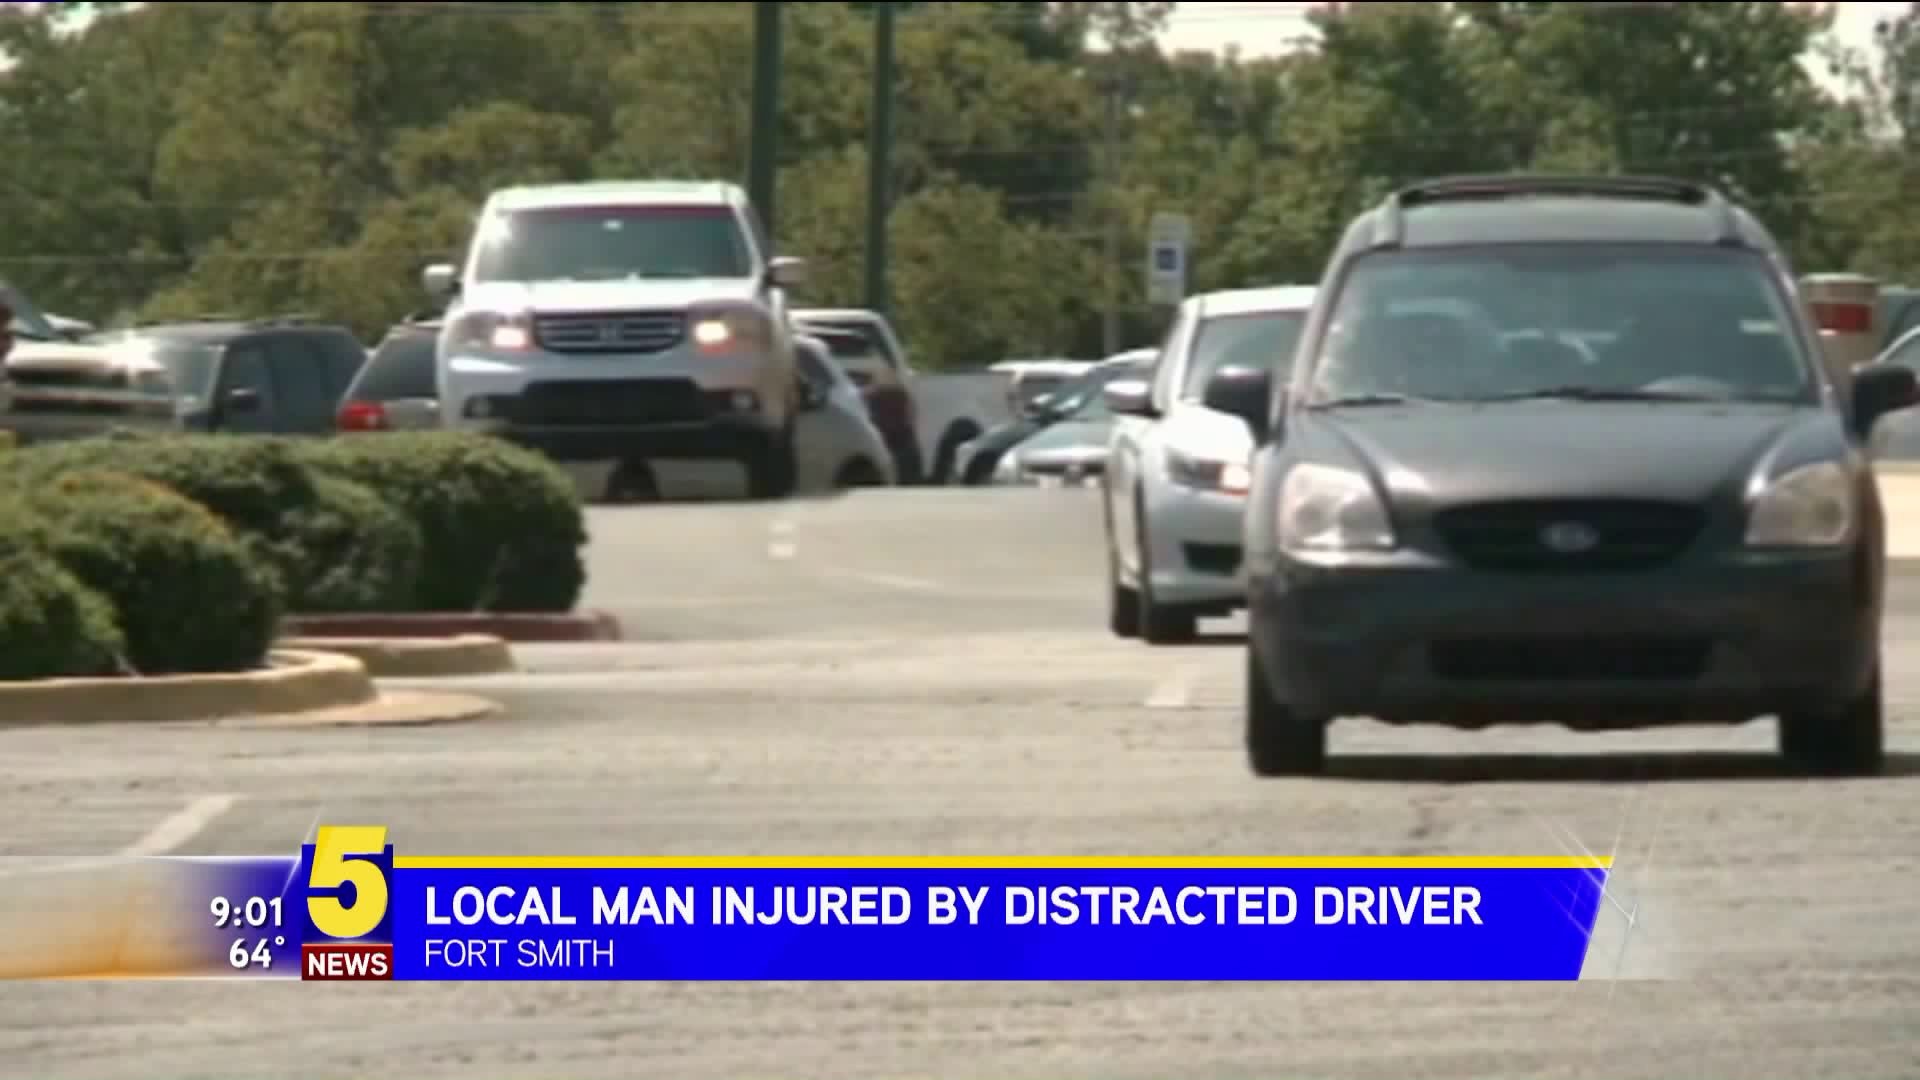 Local Man Injured By Distracted Driver